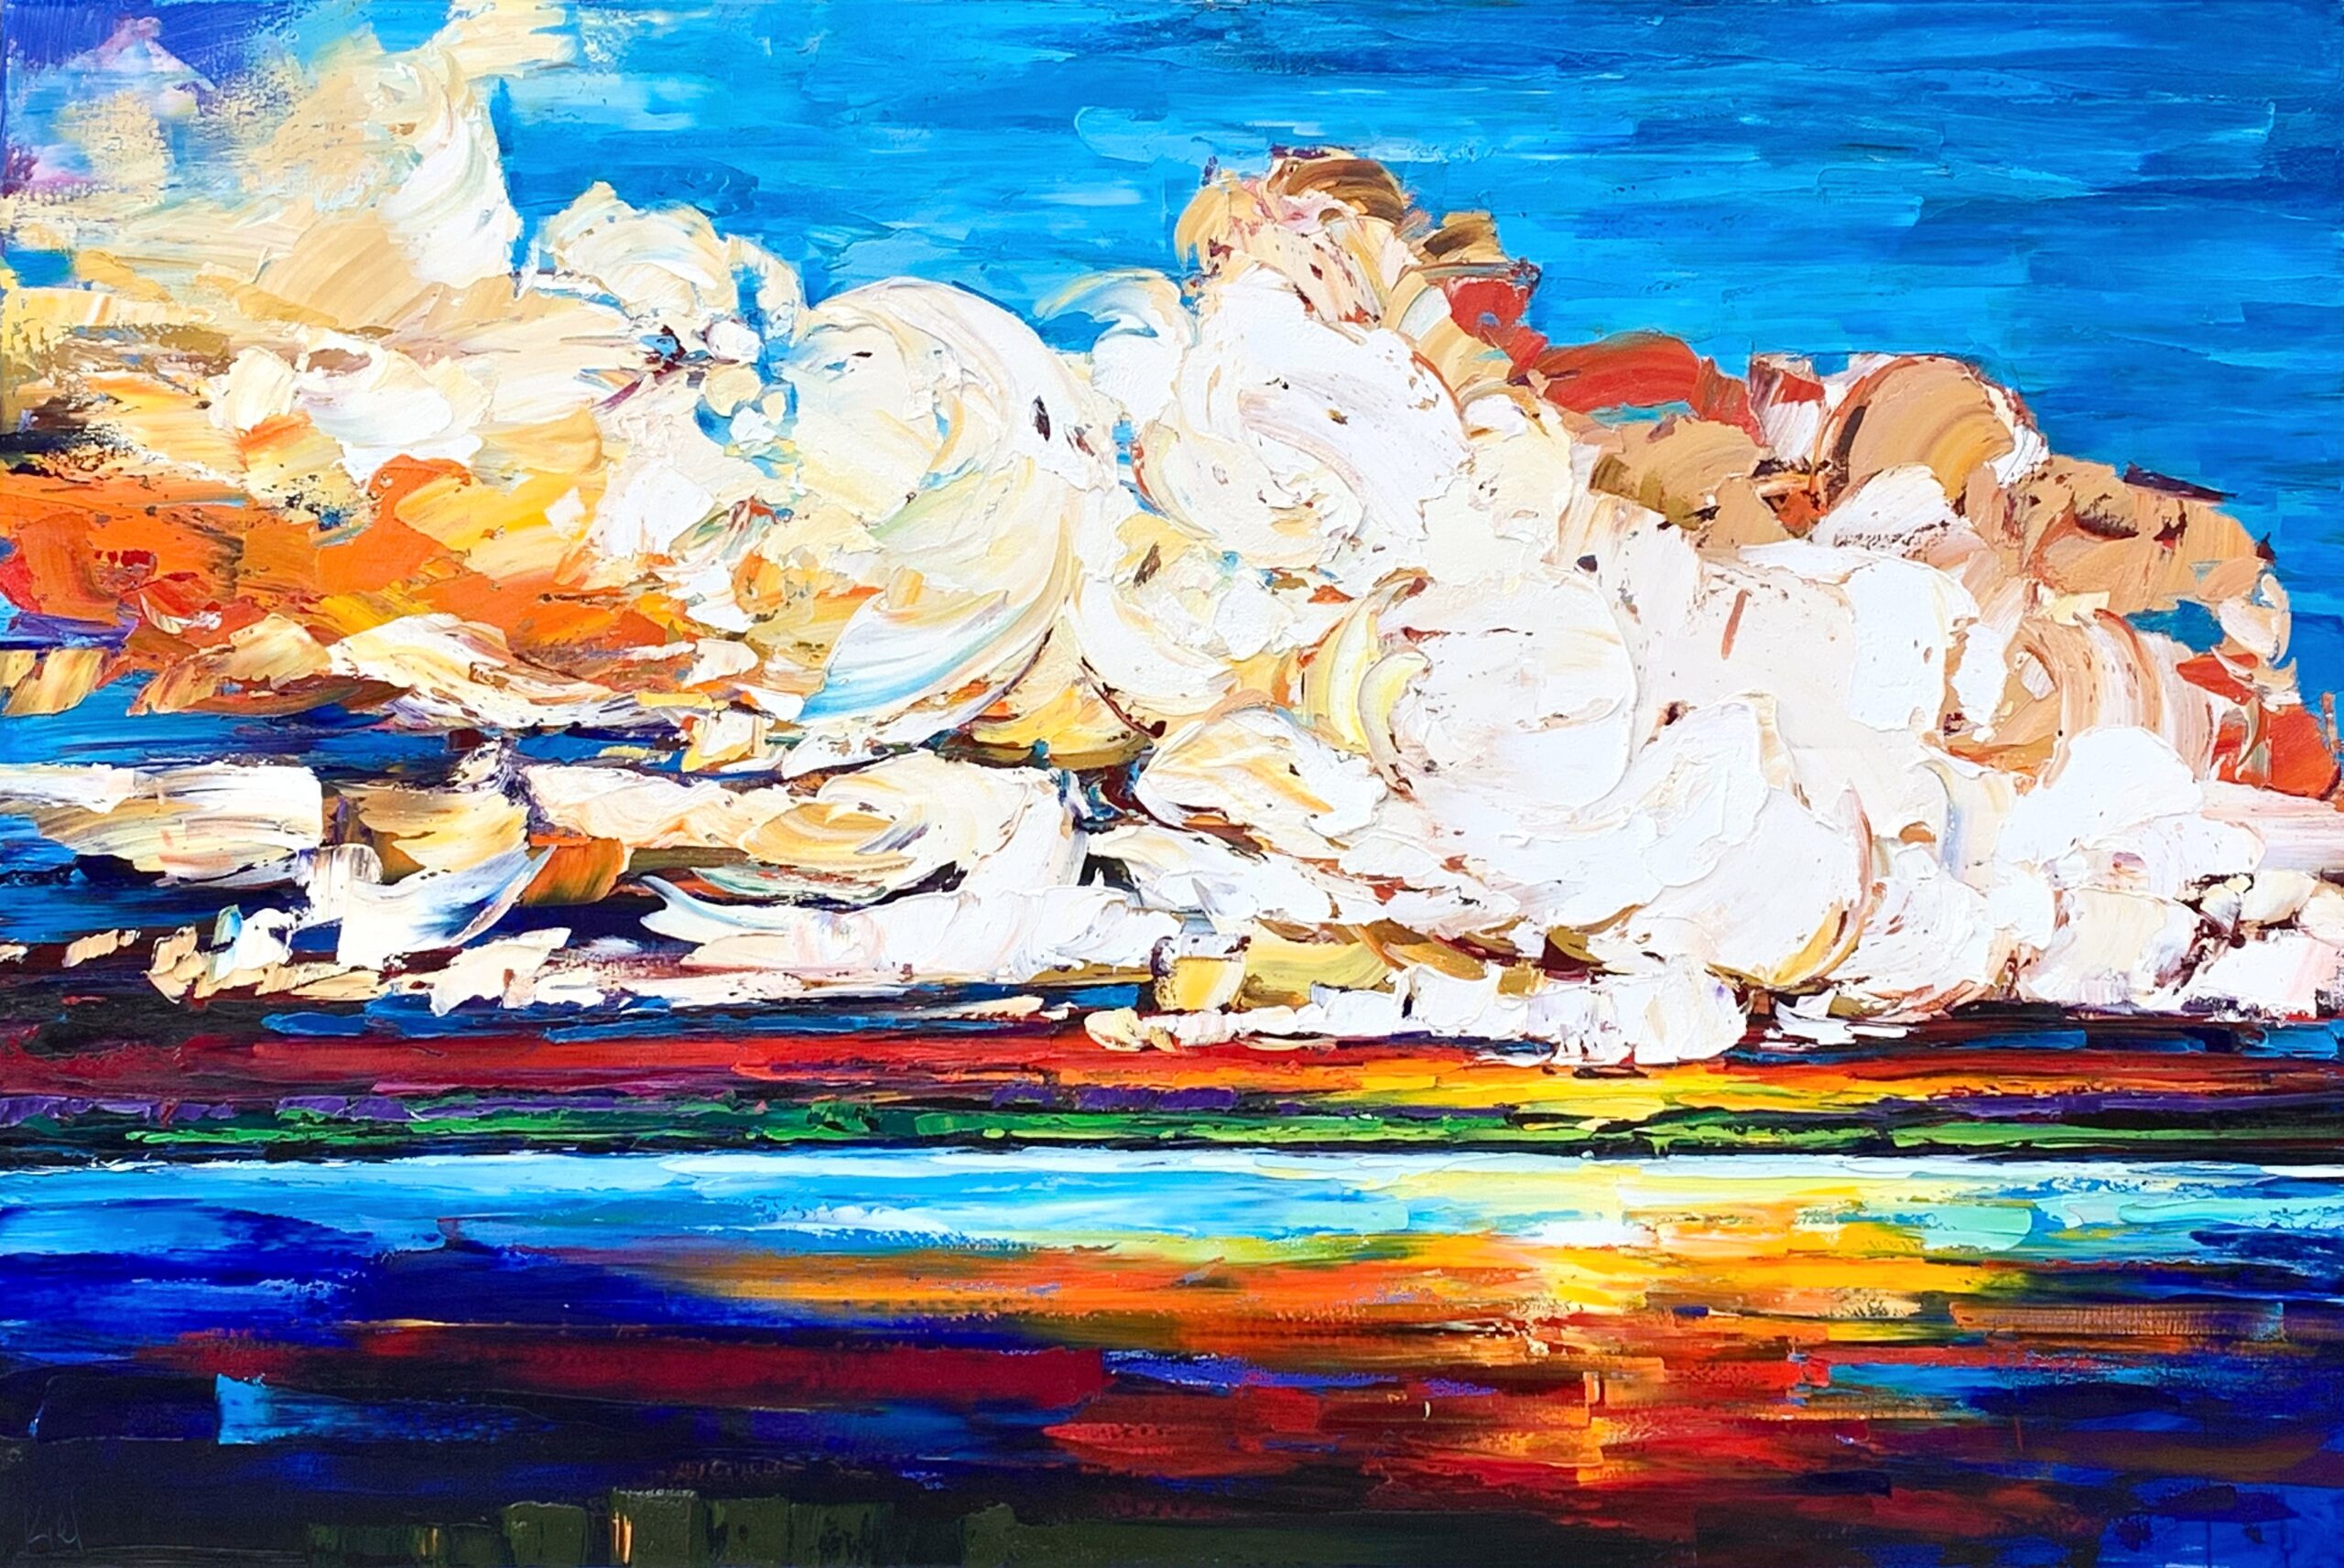 Beauty in the Chaos, oil sunset landscape painting by Kimberly Kiel | Effusion Art Gallery, Invermere BC